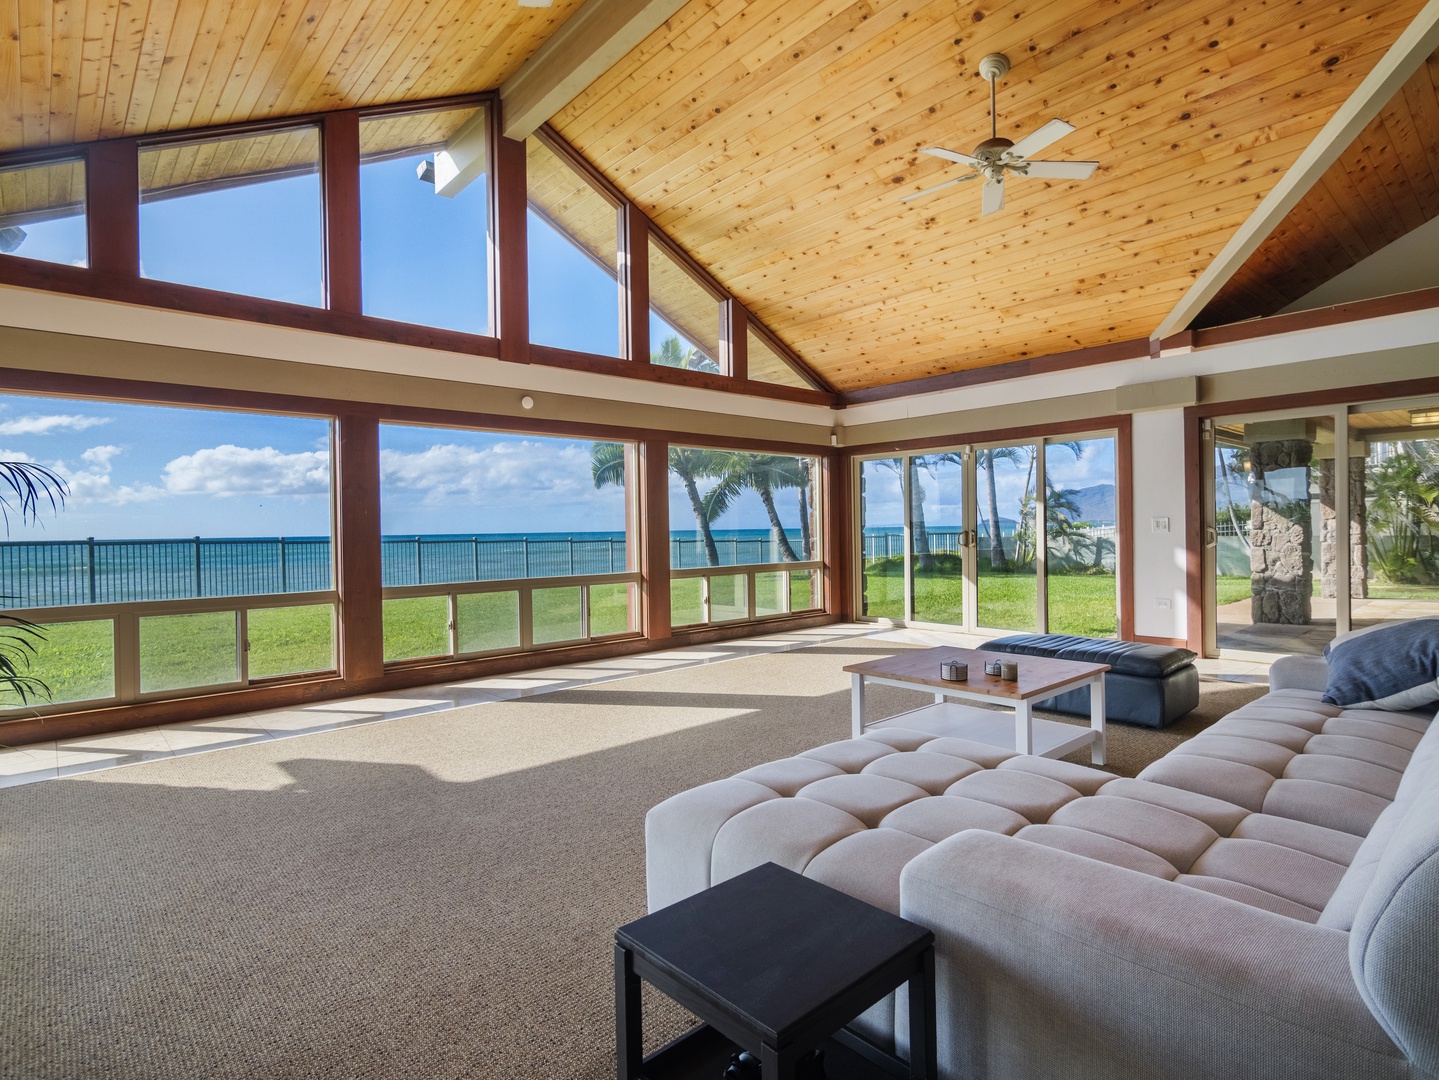 Waianae Vacation Rentals, Konishiki Beachhouse - The perfect space to relax and spend quality family time.